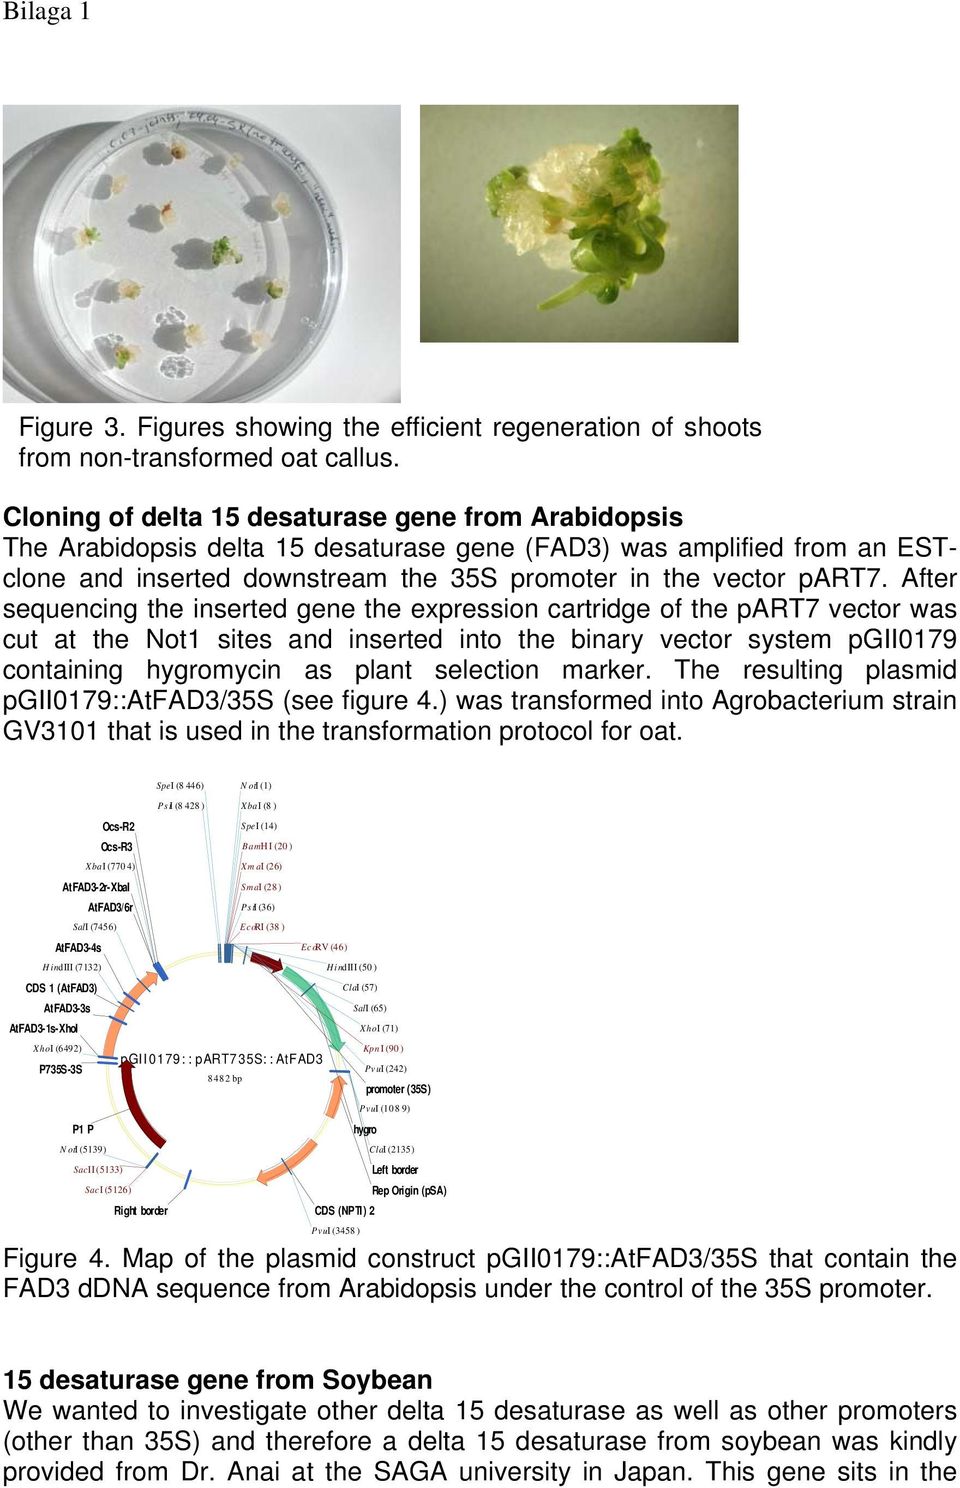 After sequencing the inserted gene the expression cartridge of the part7 vector was cut at the Not1 sites and inserted into the binary vector system pgii0179 containing hygromycin as plant selection